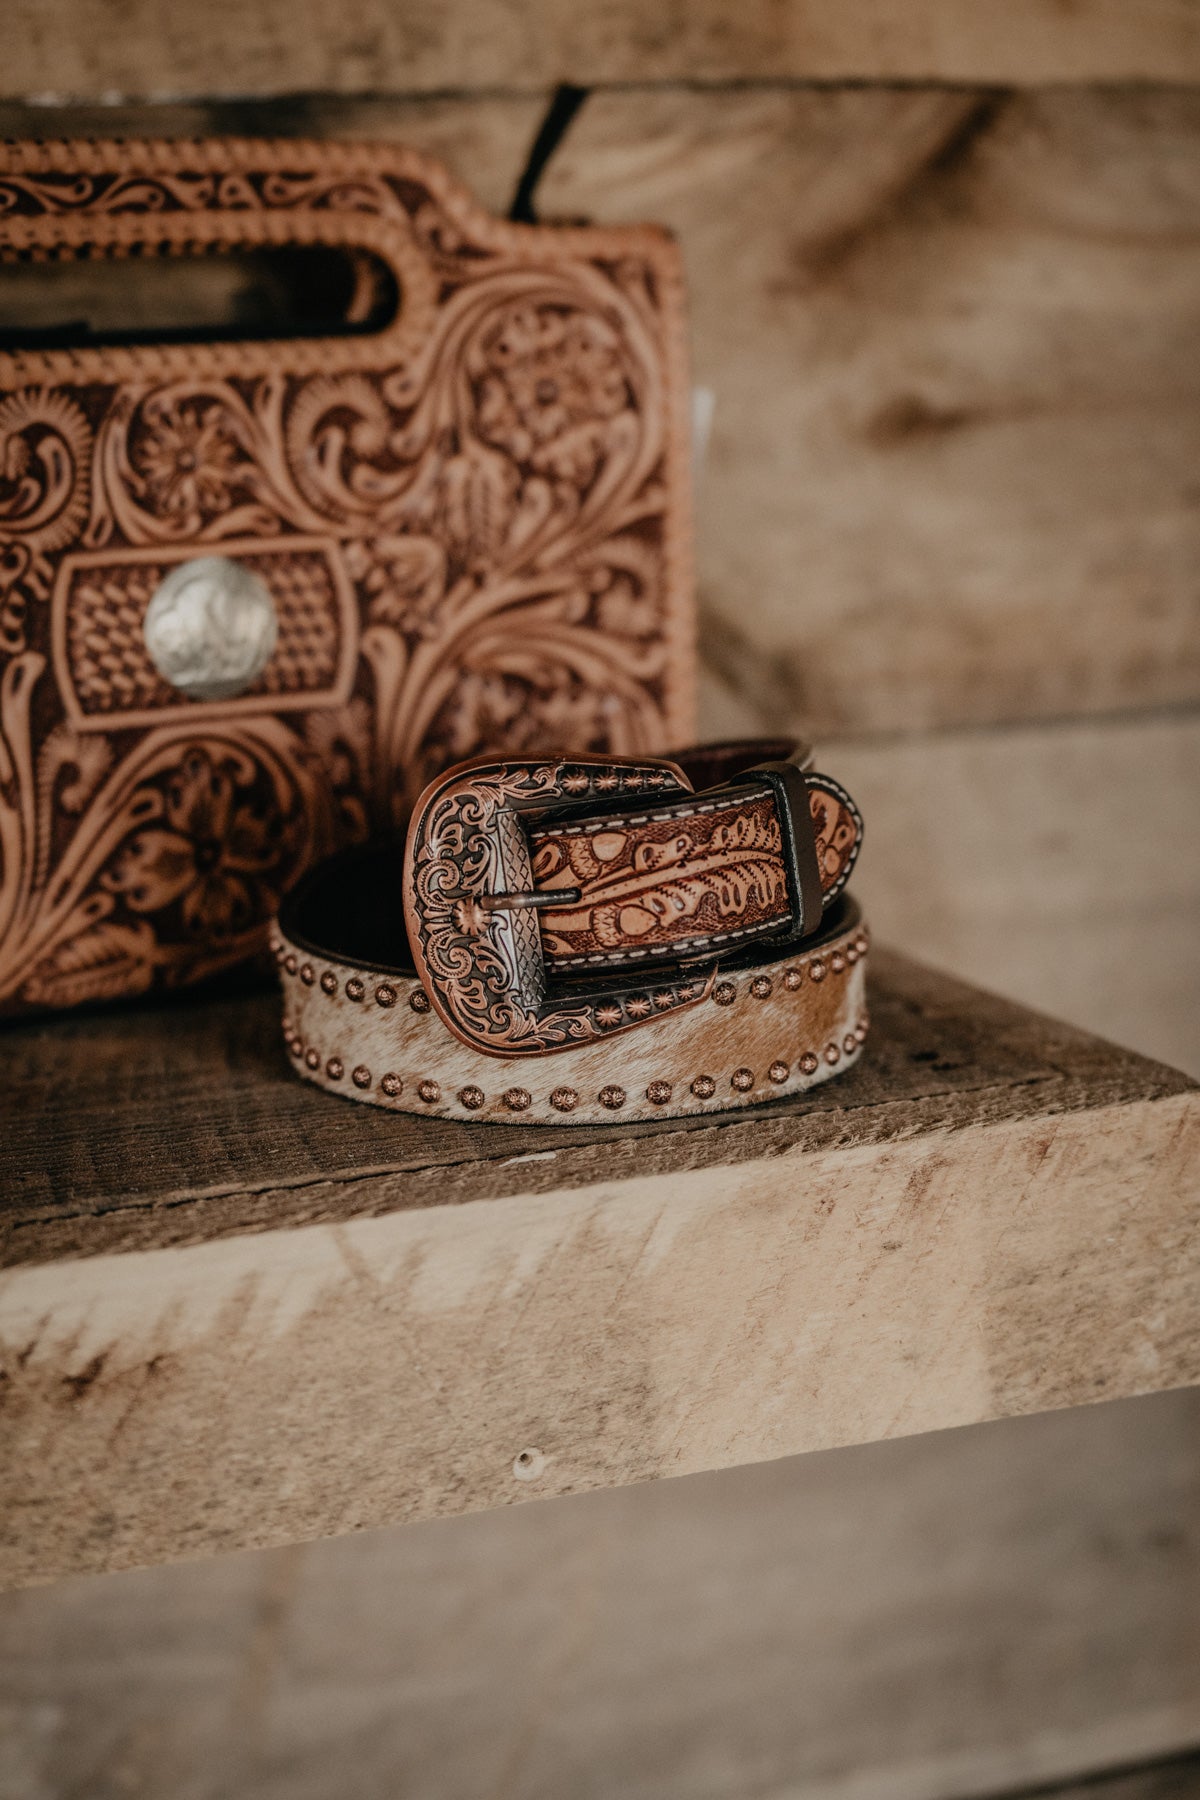 Hair-On Hide Belt with Floral Tooled Billets, Copper Buckle and Accents